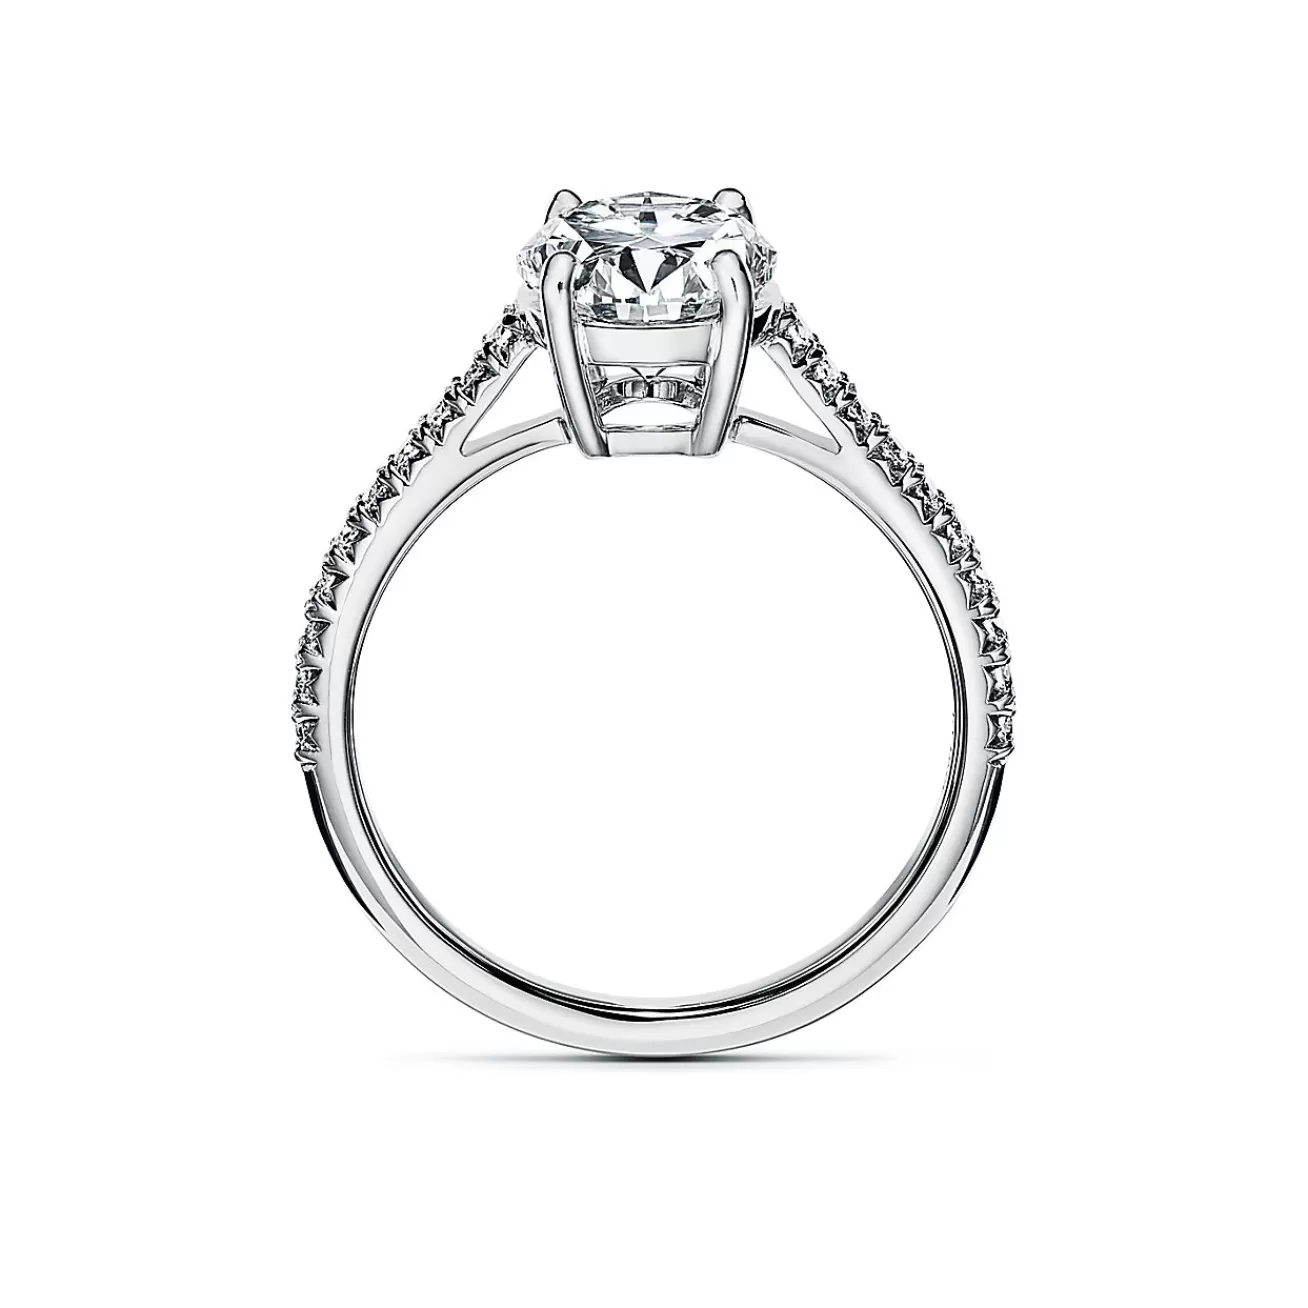 Tiffany & Co. Tiffany Novo® oval brilliant engagement ring with a pavé diamond platinum band. | ^ Engagement Rings